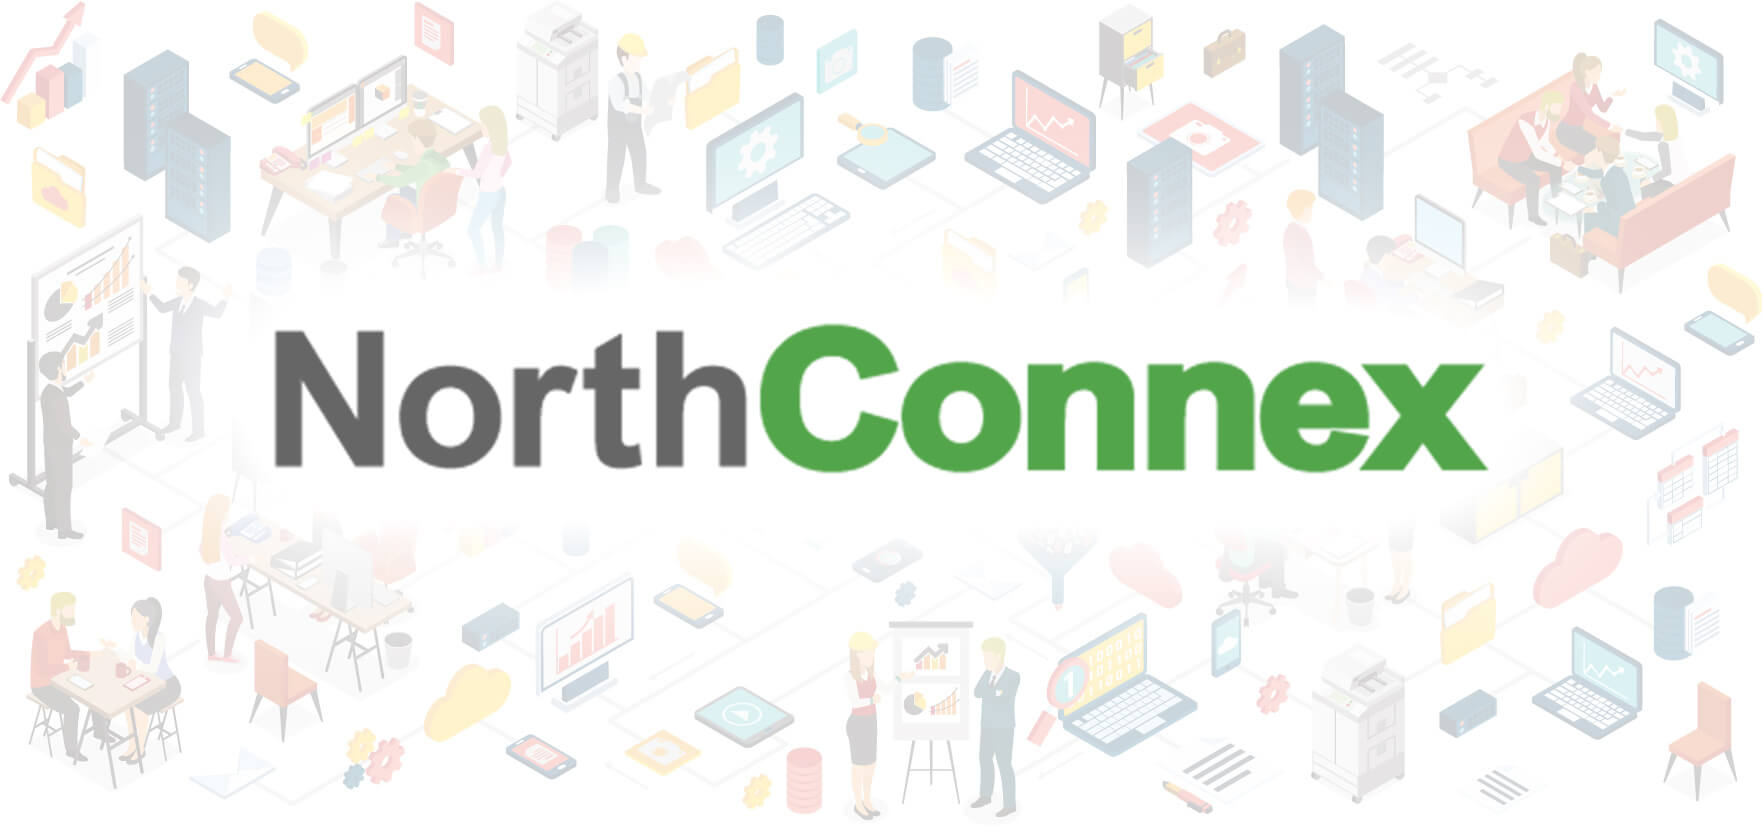 NorthConnex: Innovations in Engineering Surveying